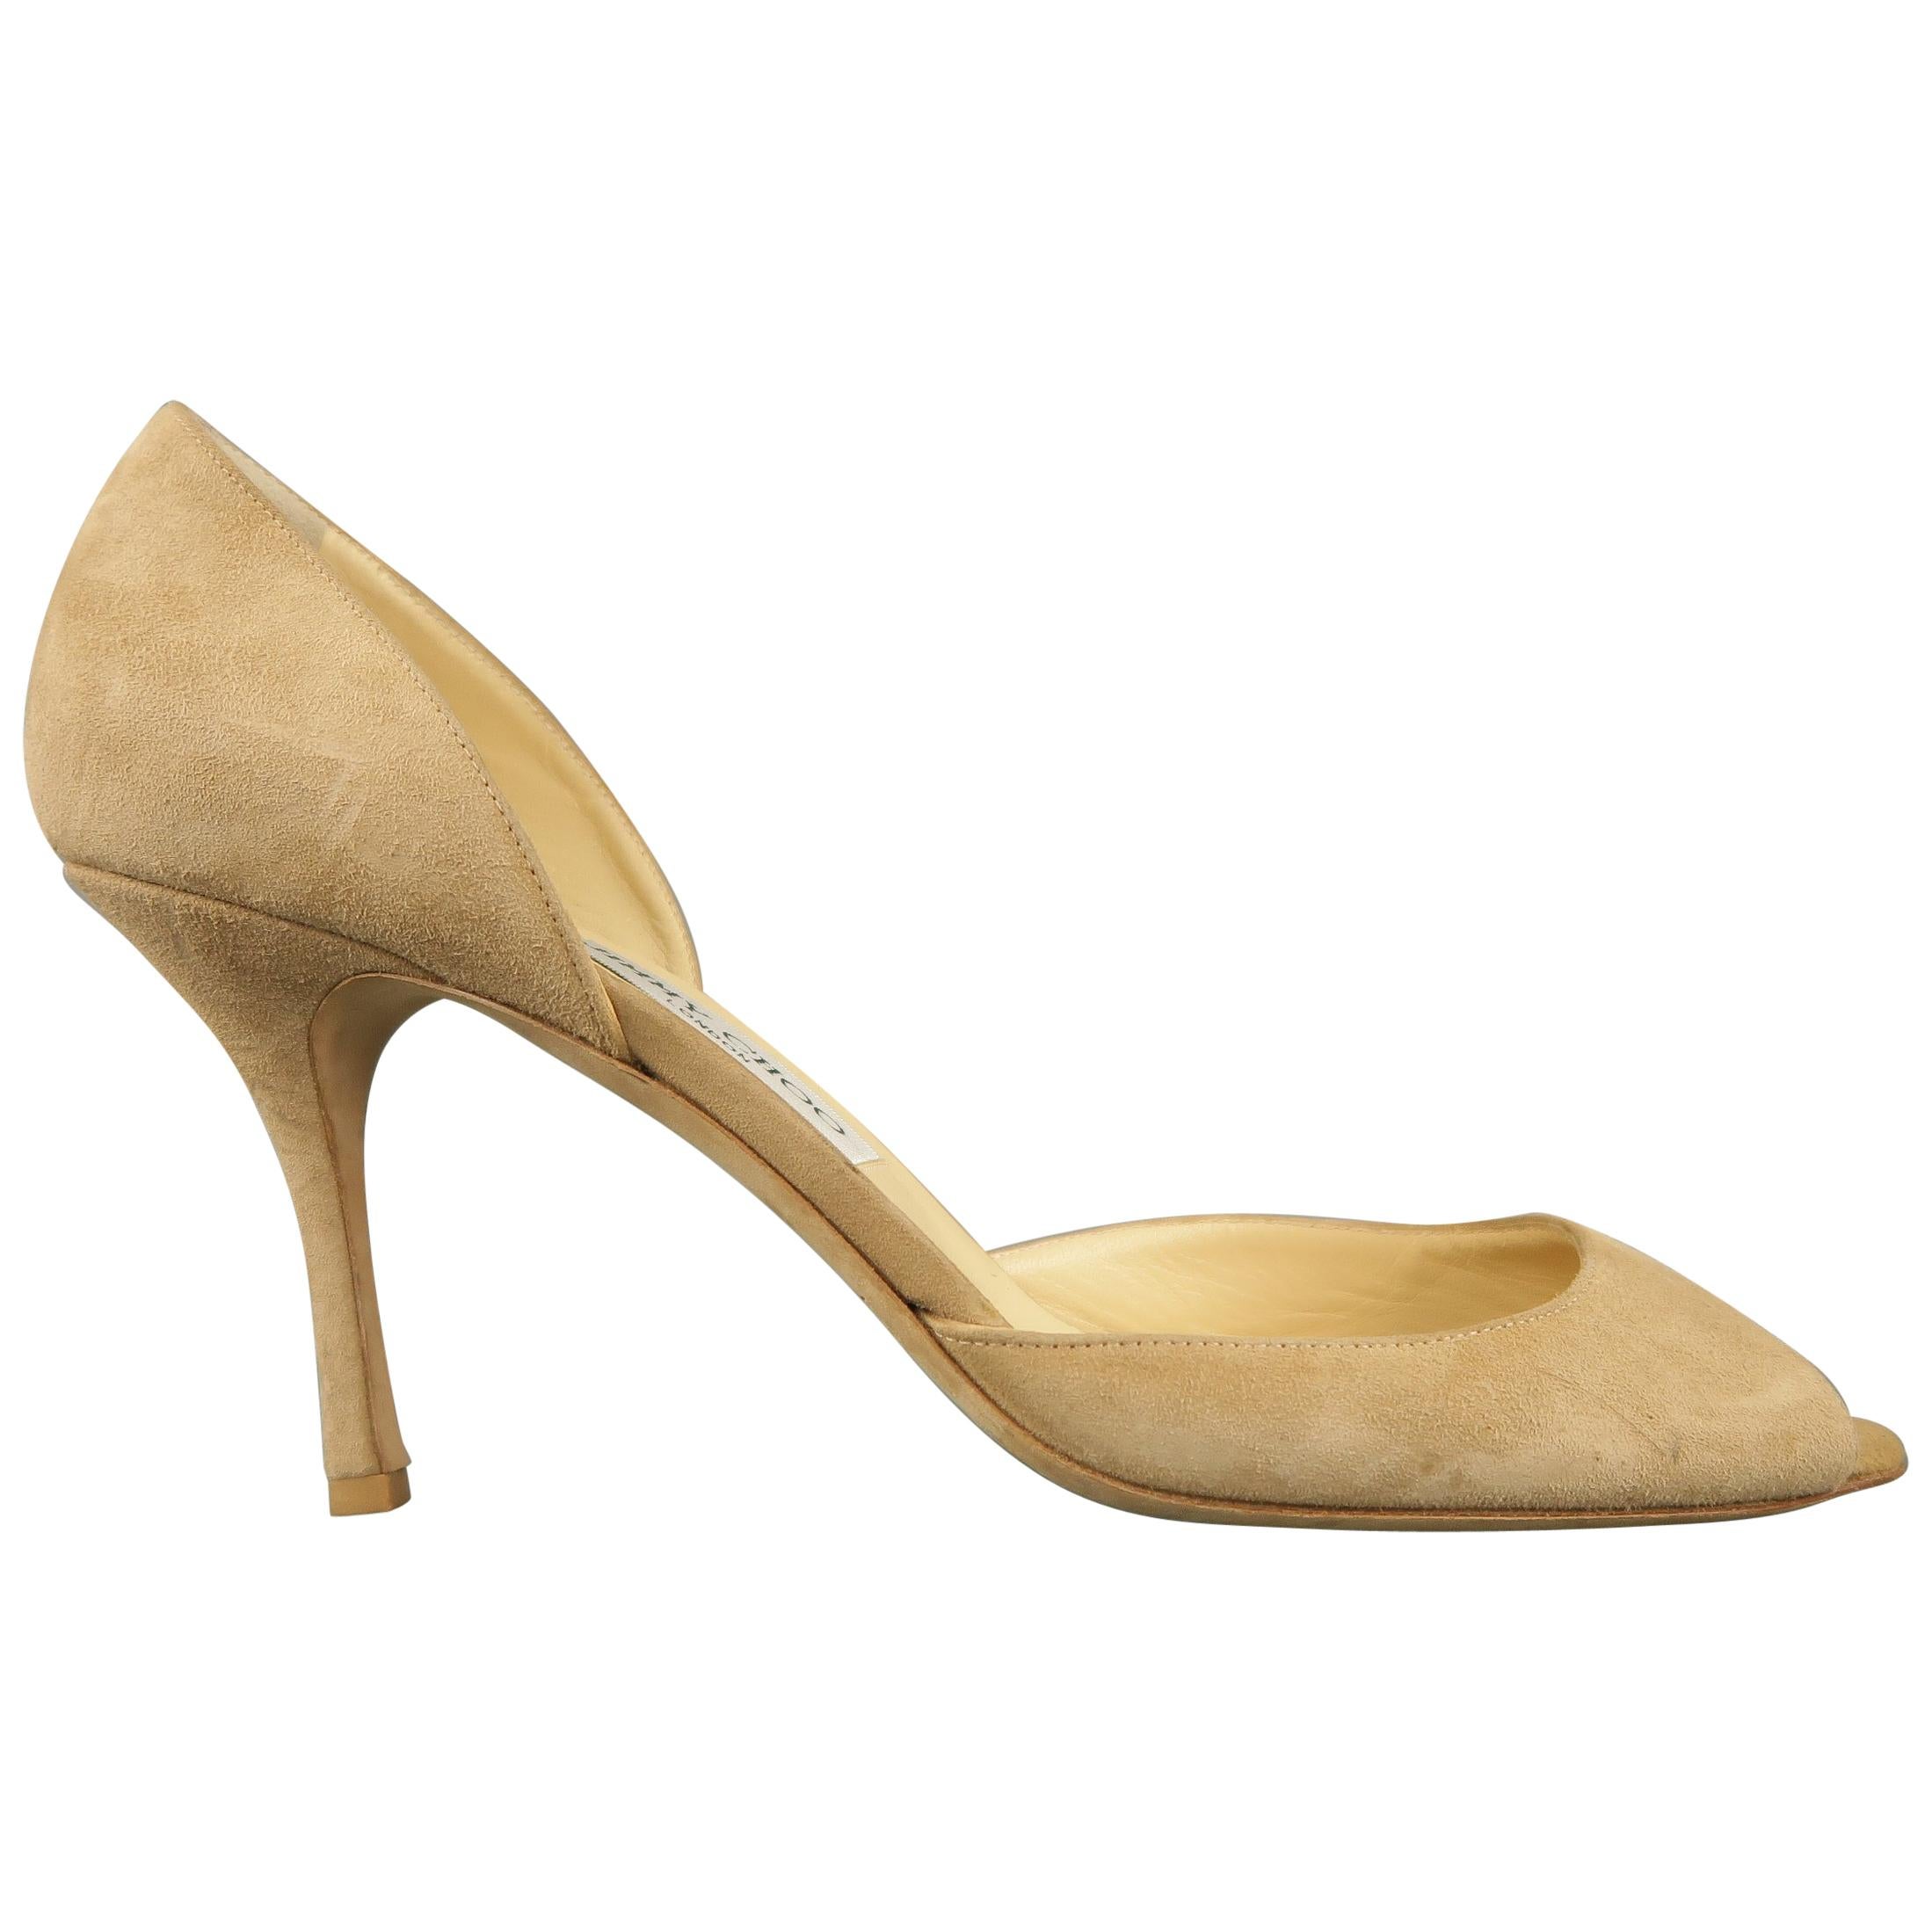 JIMMY CHOO Size 12 Tan Beige Leather Cutout Toe Pointed Pumps